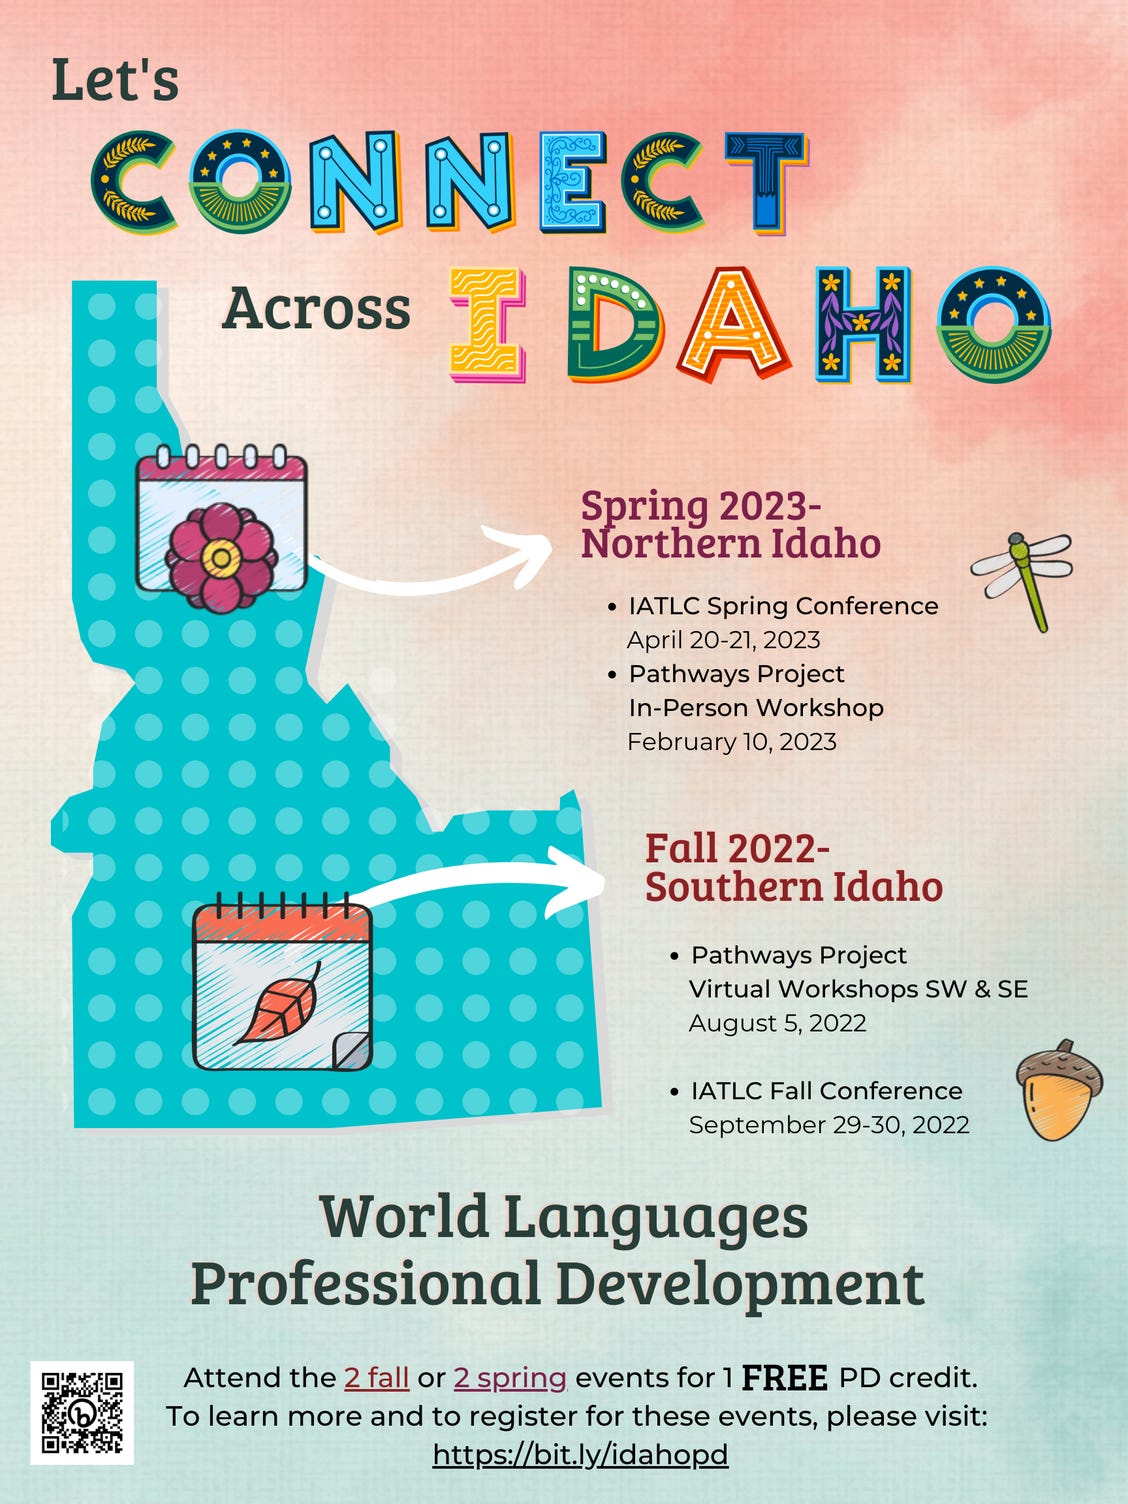 Let's Connect Across Idaho. Spring 2023- Northern Idaho. Iatlc spring conference. April 20-21, 2023. Pathways Project In-person Workshop. February 10, 2023. Fall 2022. Southern Idaho. Pathways Project Virtual Workshops SW & SE August 5, 2022. IATLC Fall Conference. September 29-30, 2022. World Languages Professional Development. Attend the 2 fall or 2 spring events for 1 free pd credit. To learn more and to register for these events, please visit https://bit.ly/idahopd